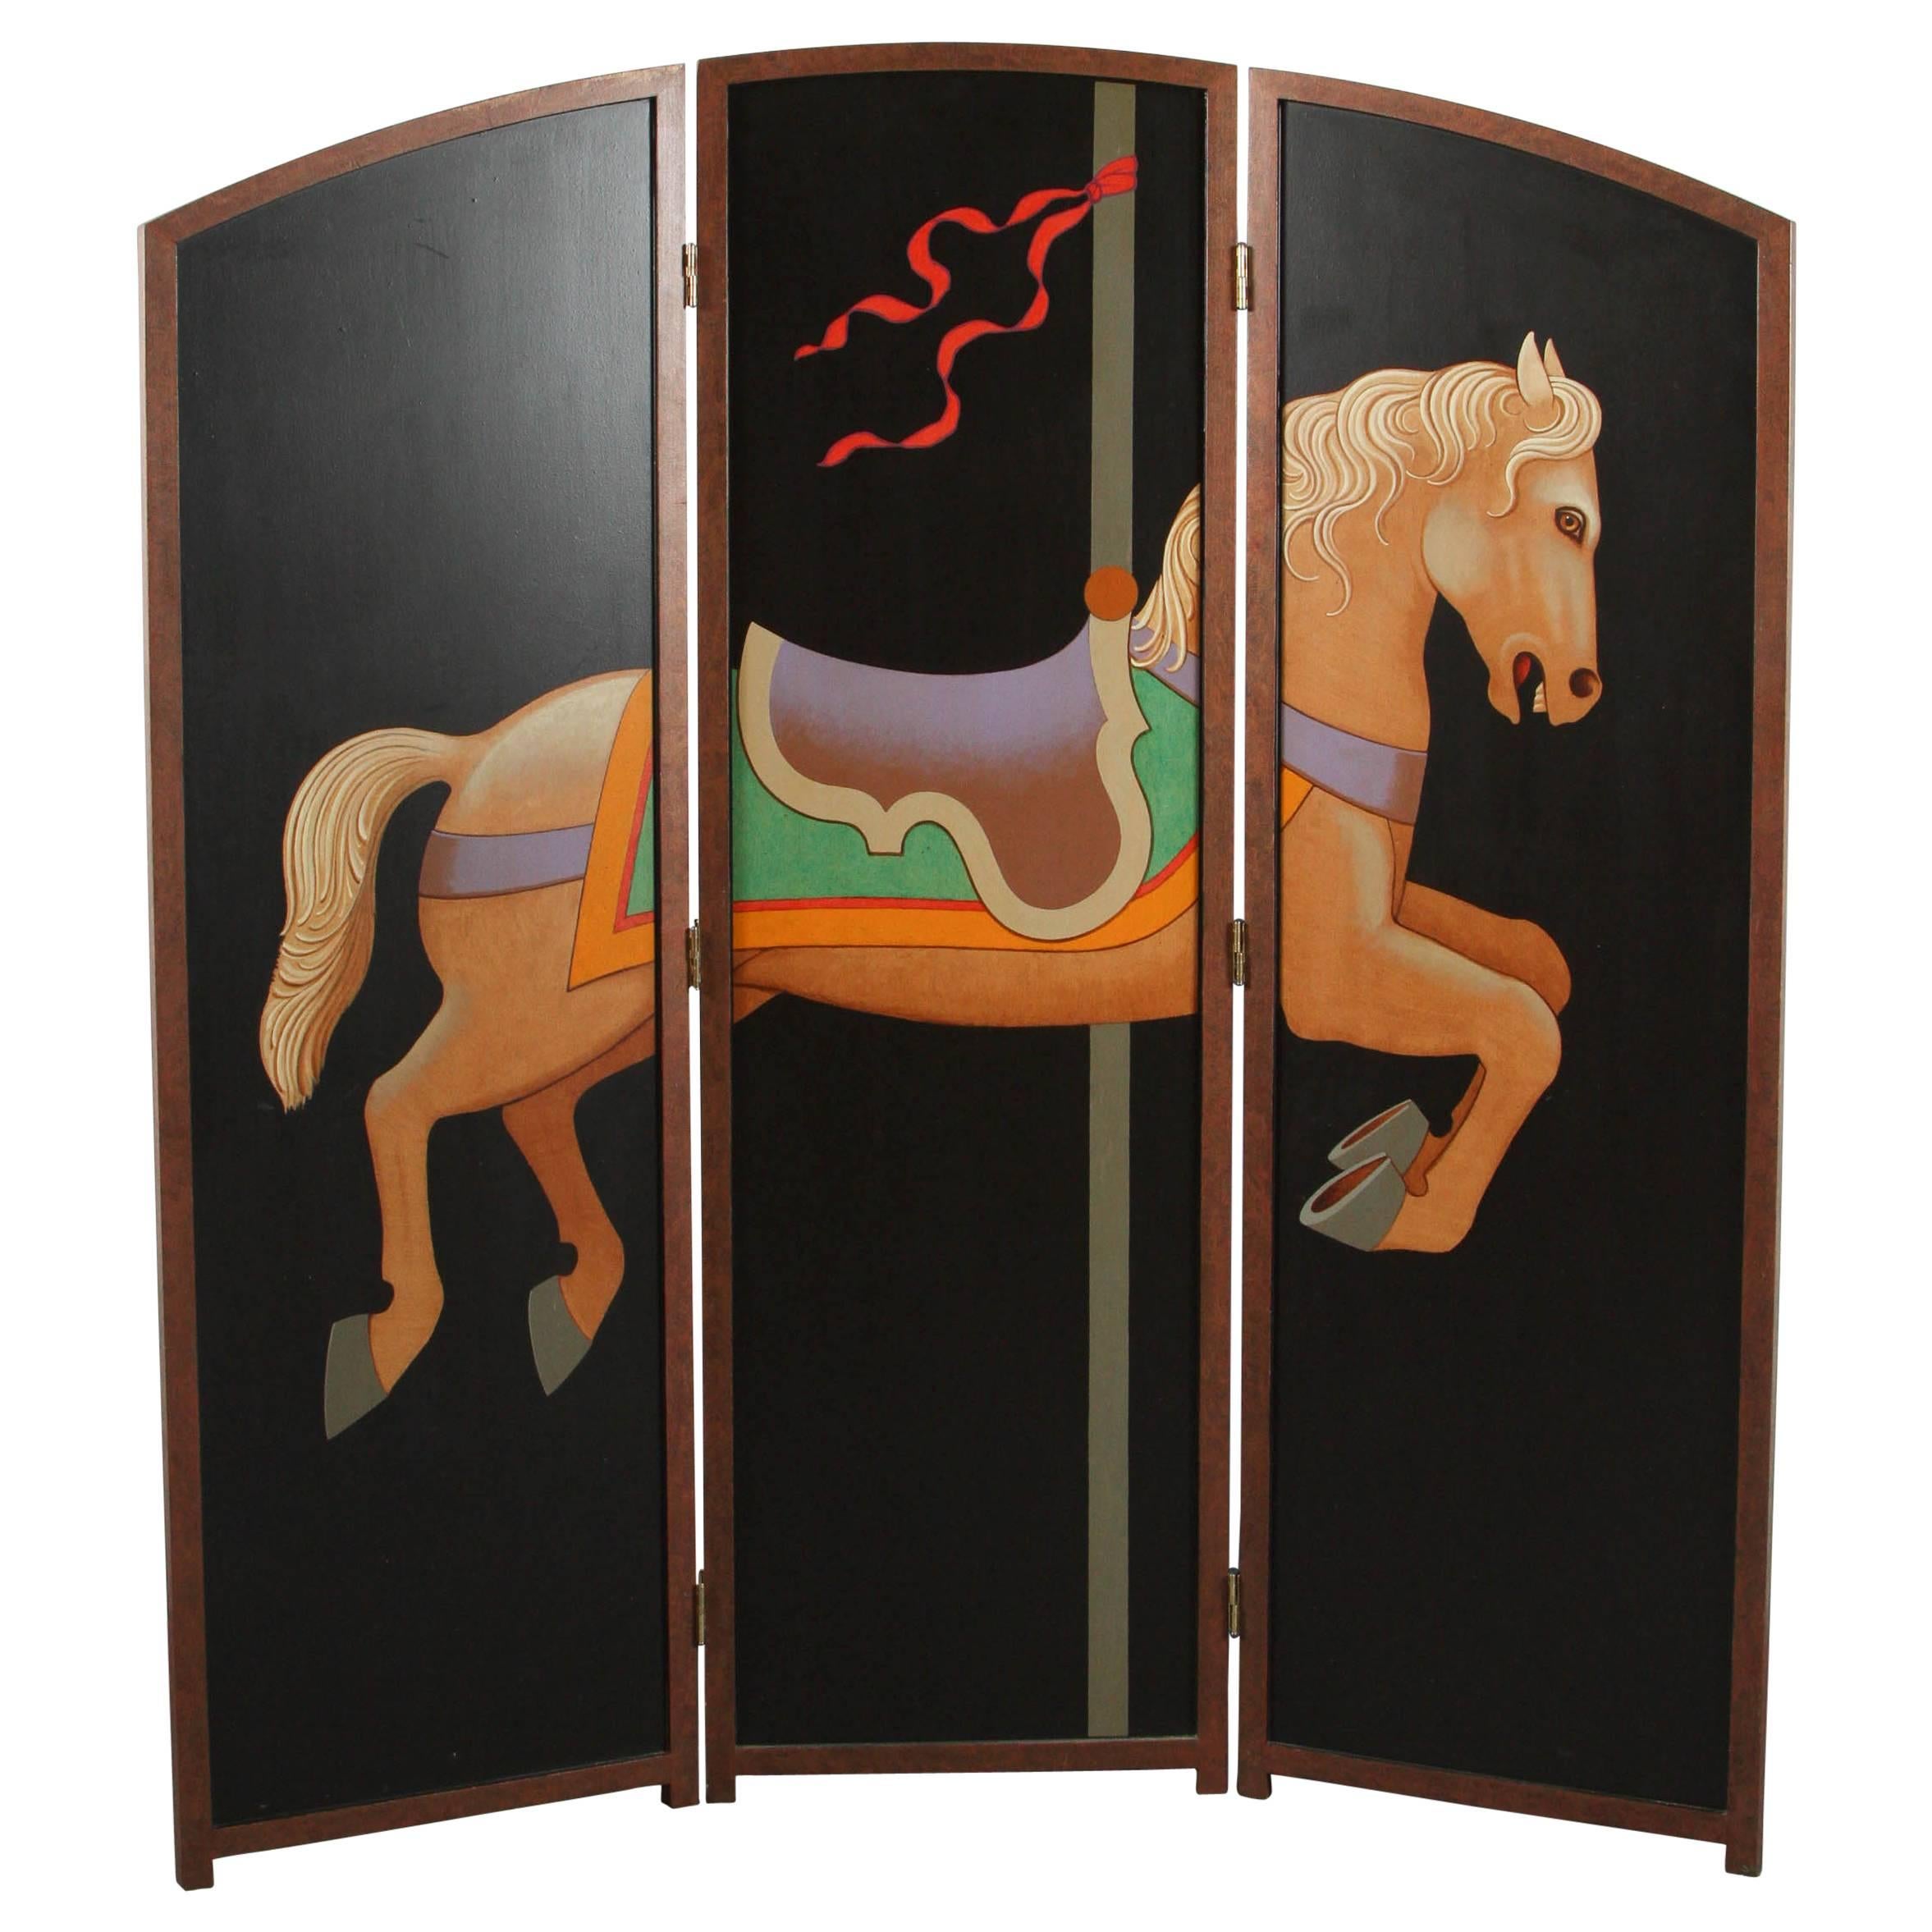 Beautiful Hand-Painted Folding Screen with Carousel Horse by Lynn Curlee